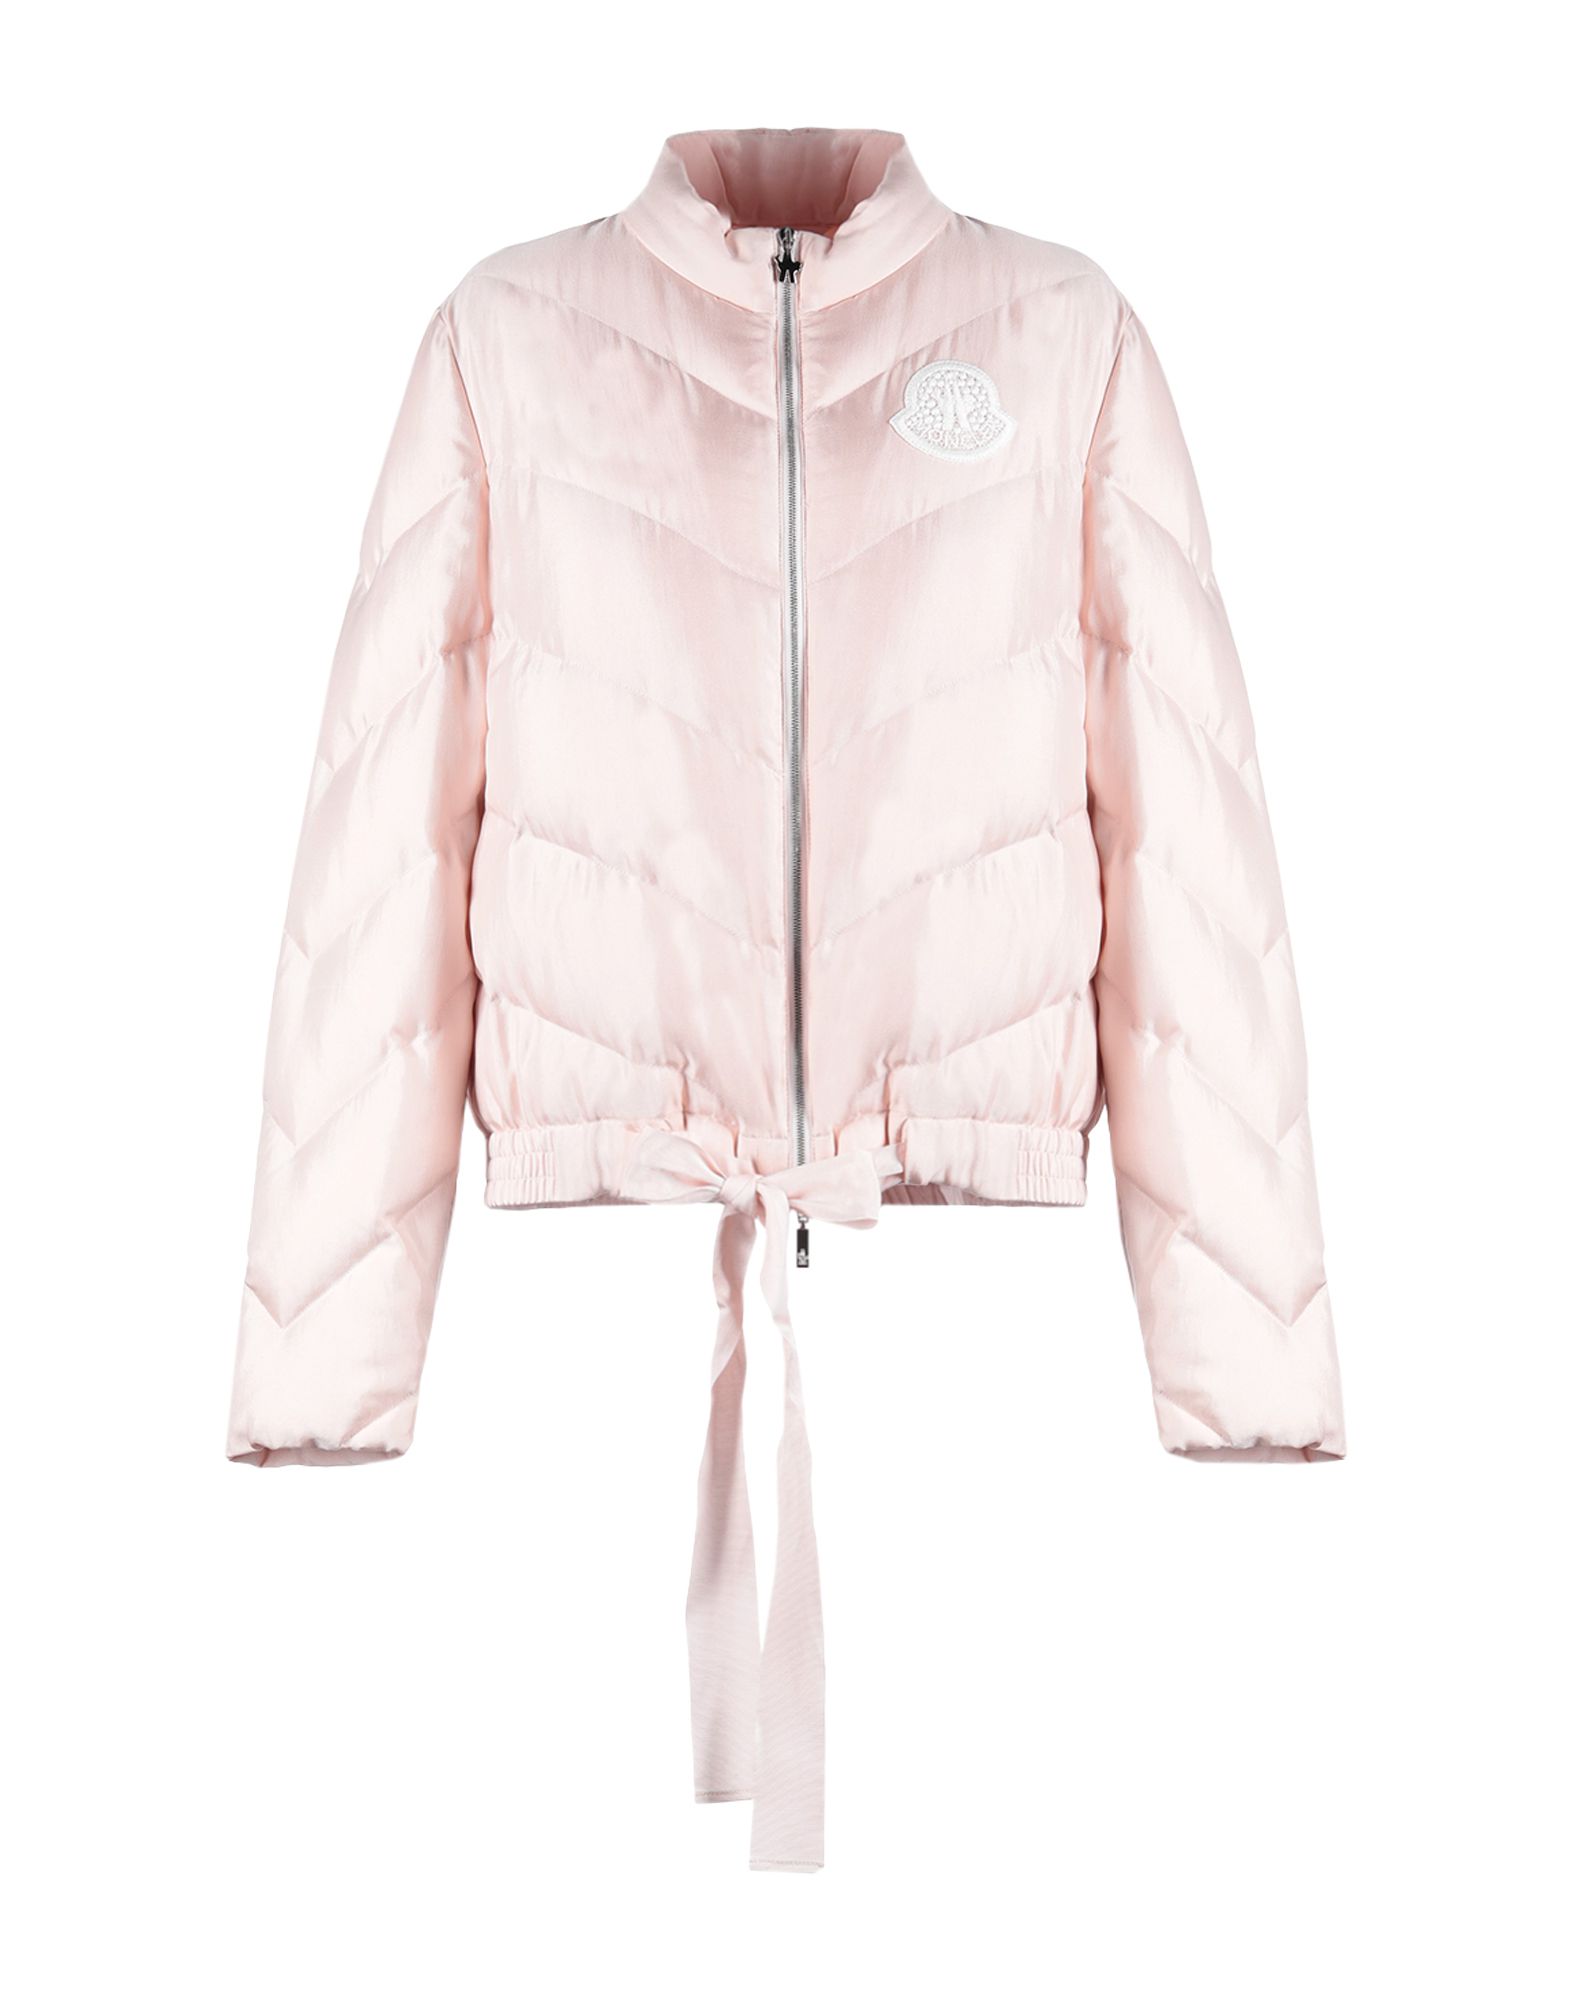 ＜YOOX＞ MONCLER GAMME ROUGE レディース ダウンジャケット ライトピンク 0 シルク 100%画像